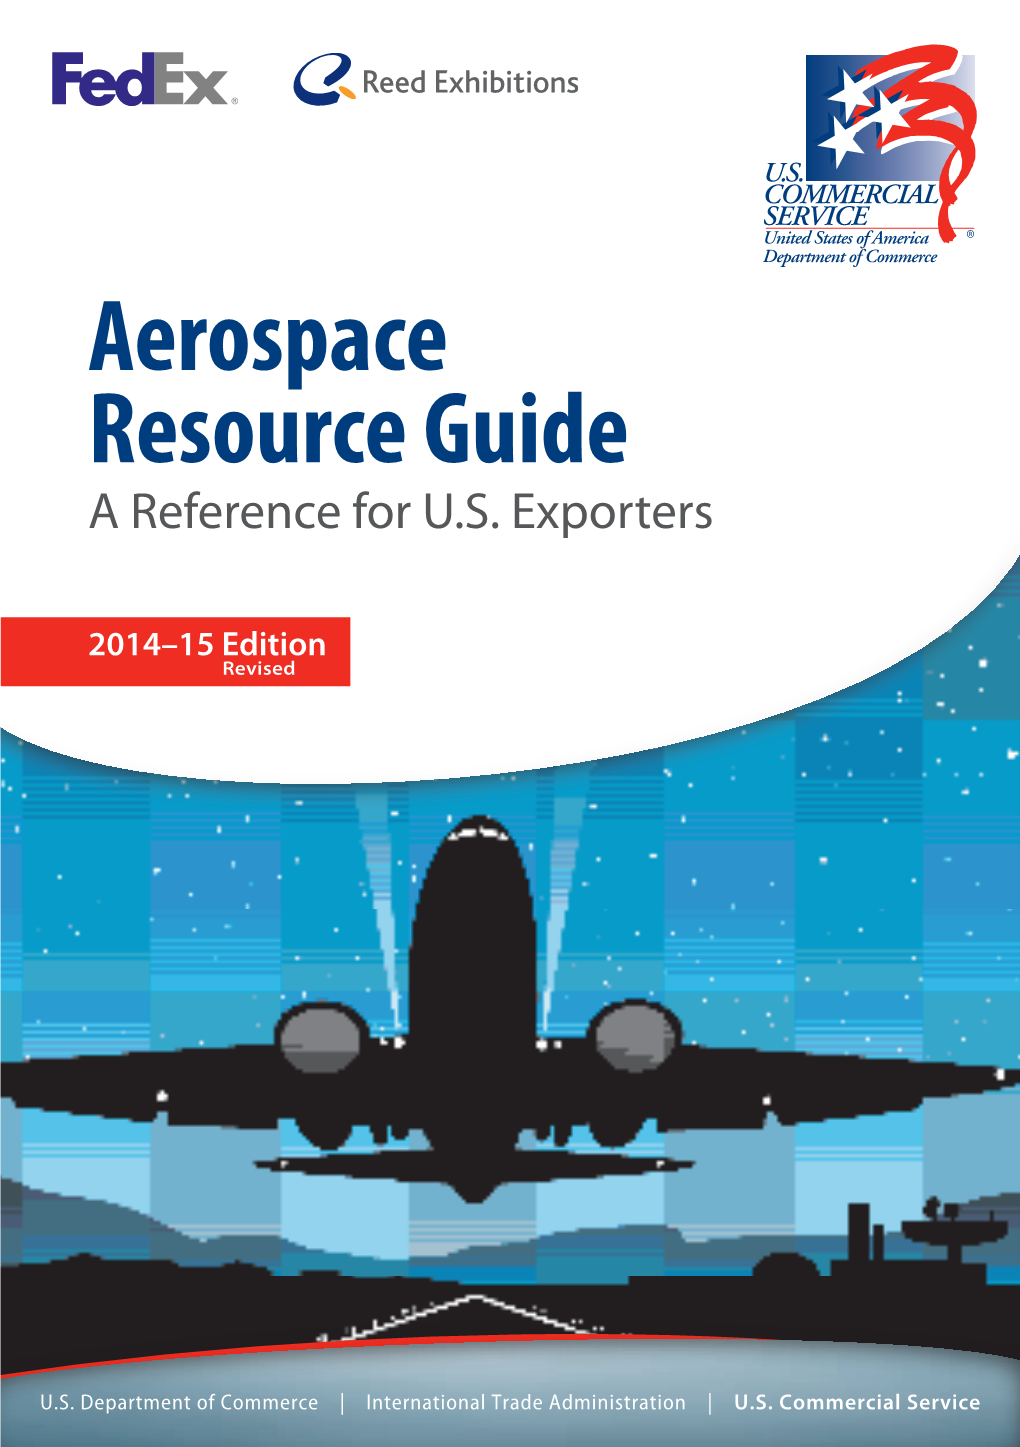 Aerospace Resource Guide a Reference for U.S